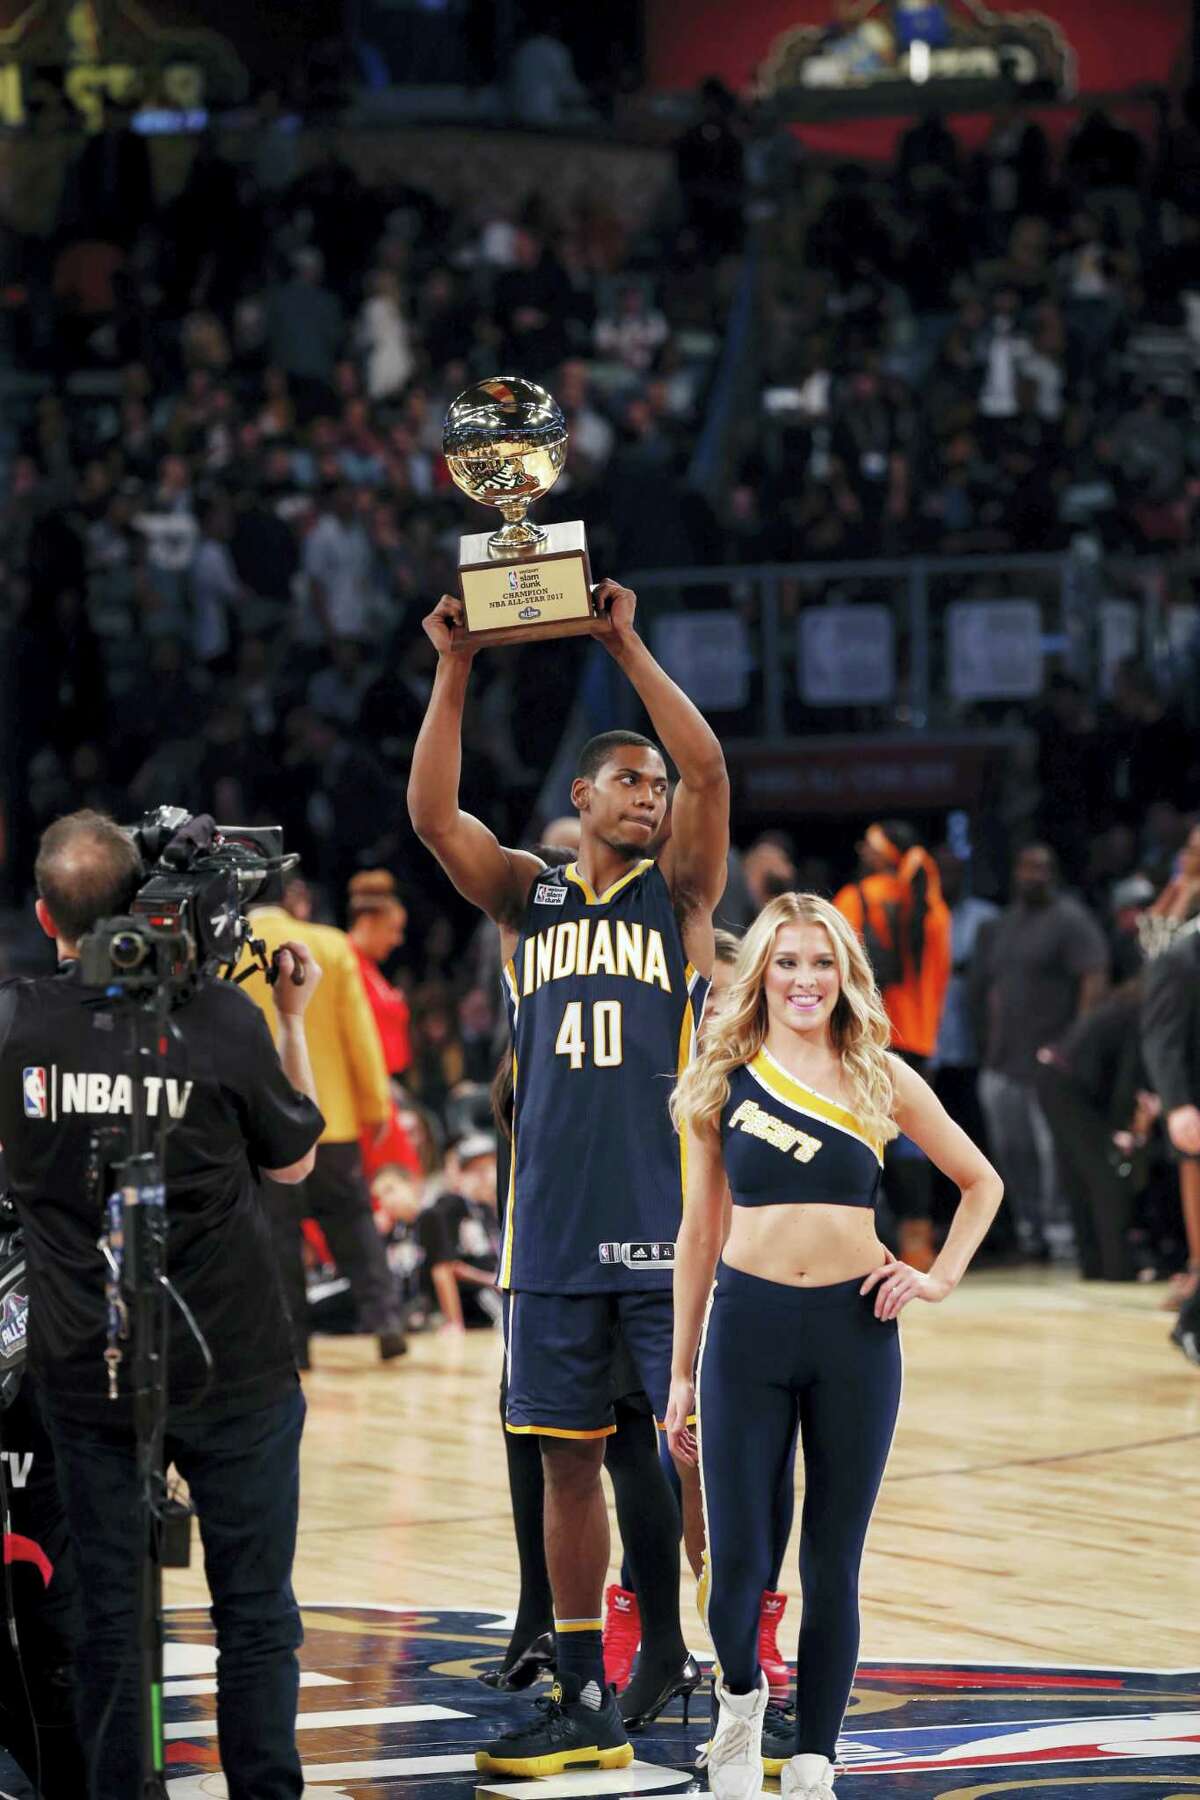 Indiana pacers Glenn Robinson III holds up his trophy after winning the slam dunk contest during NBA All-Star Saturday Night events in New Orleans, Saturday, Feb. 18, 2017. (AP Photo/Gerald Herbert)